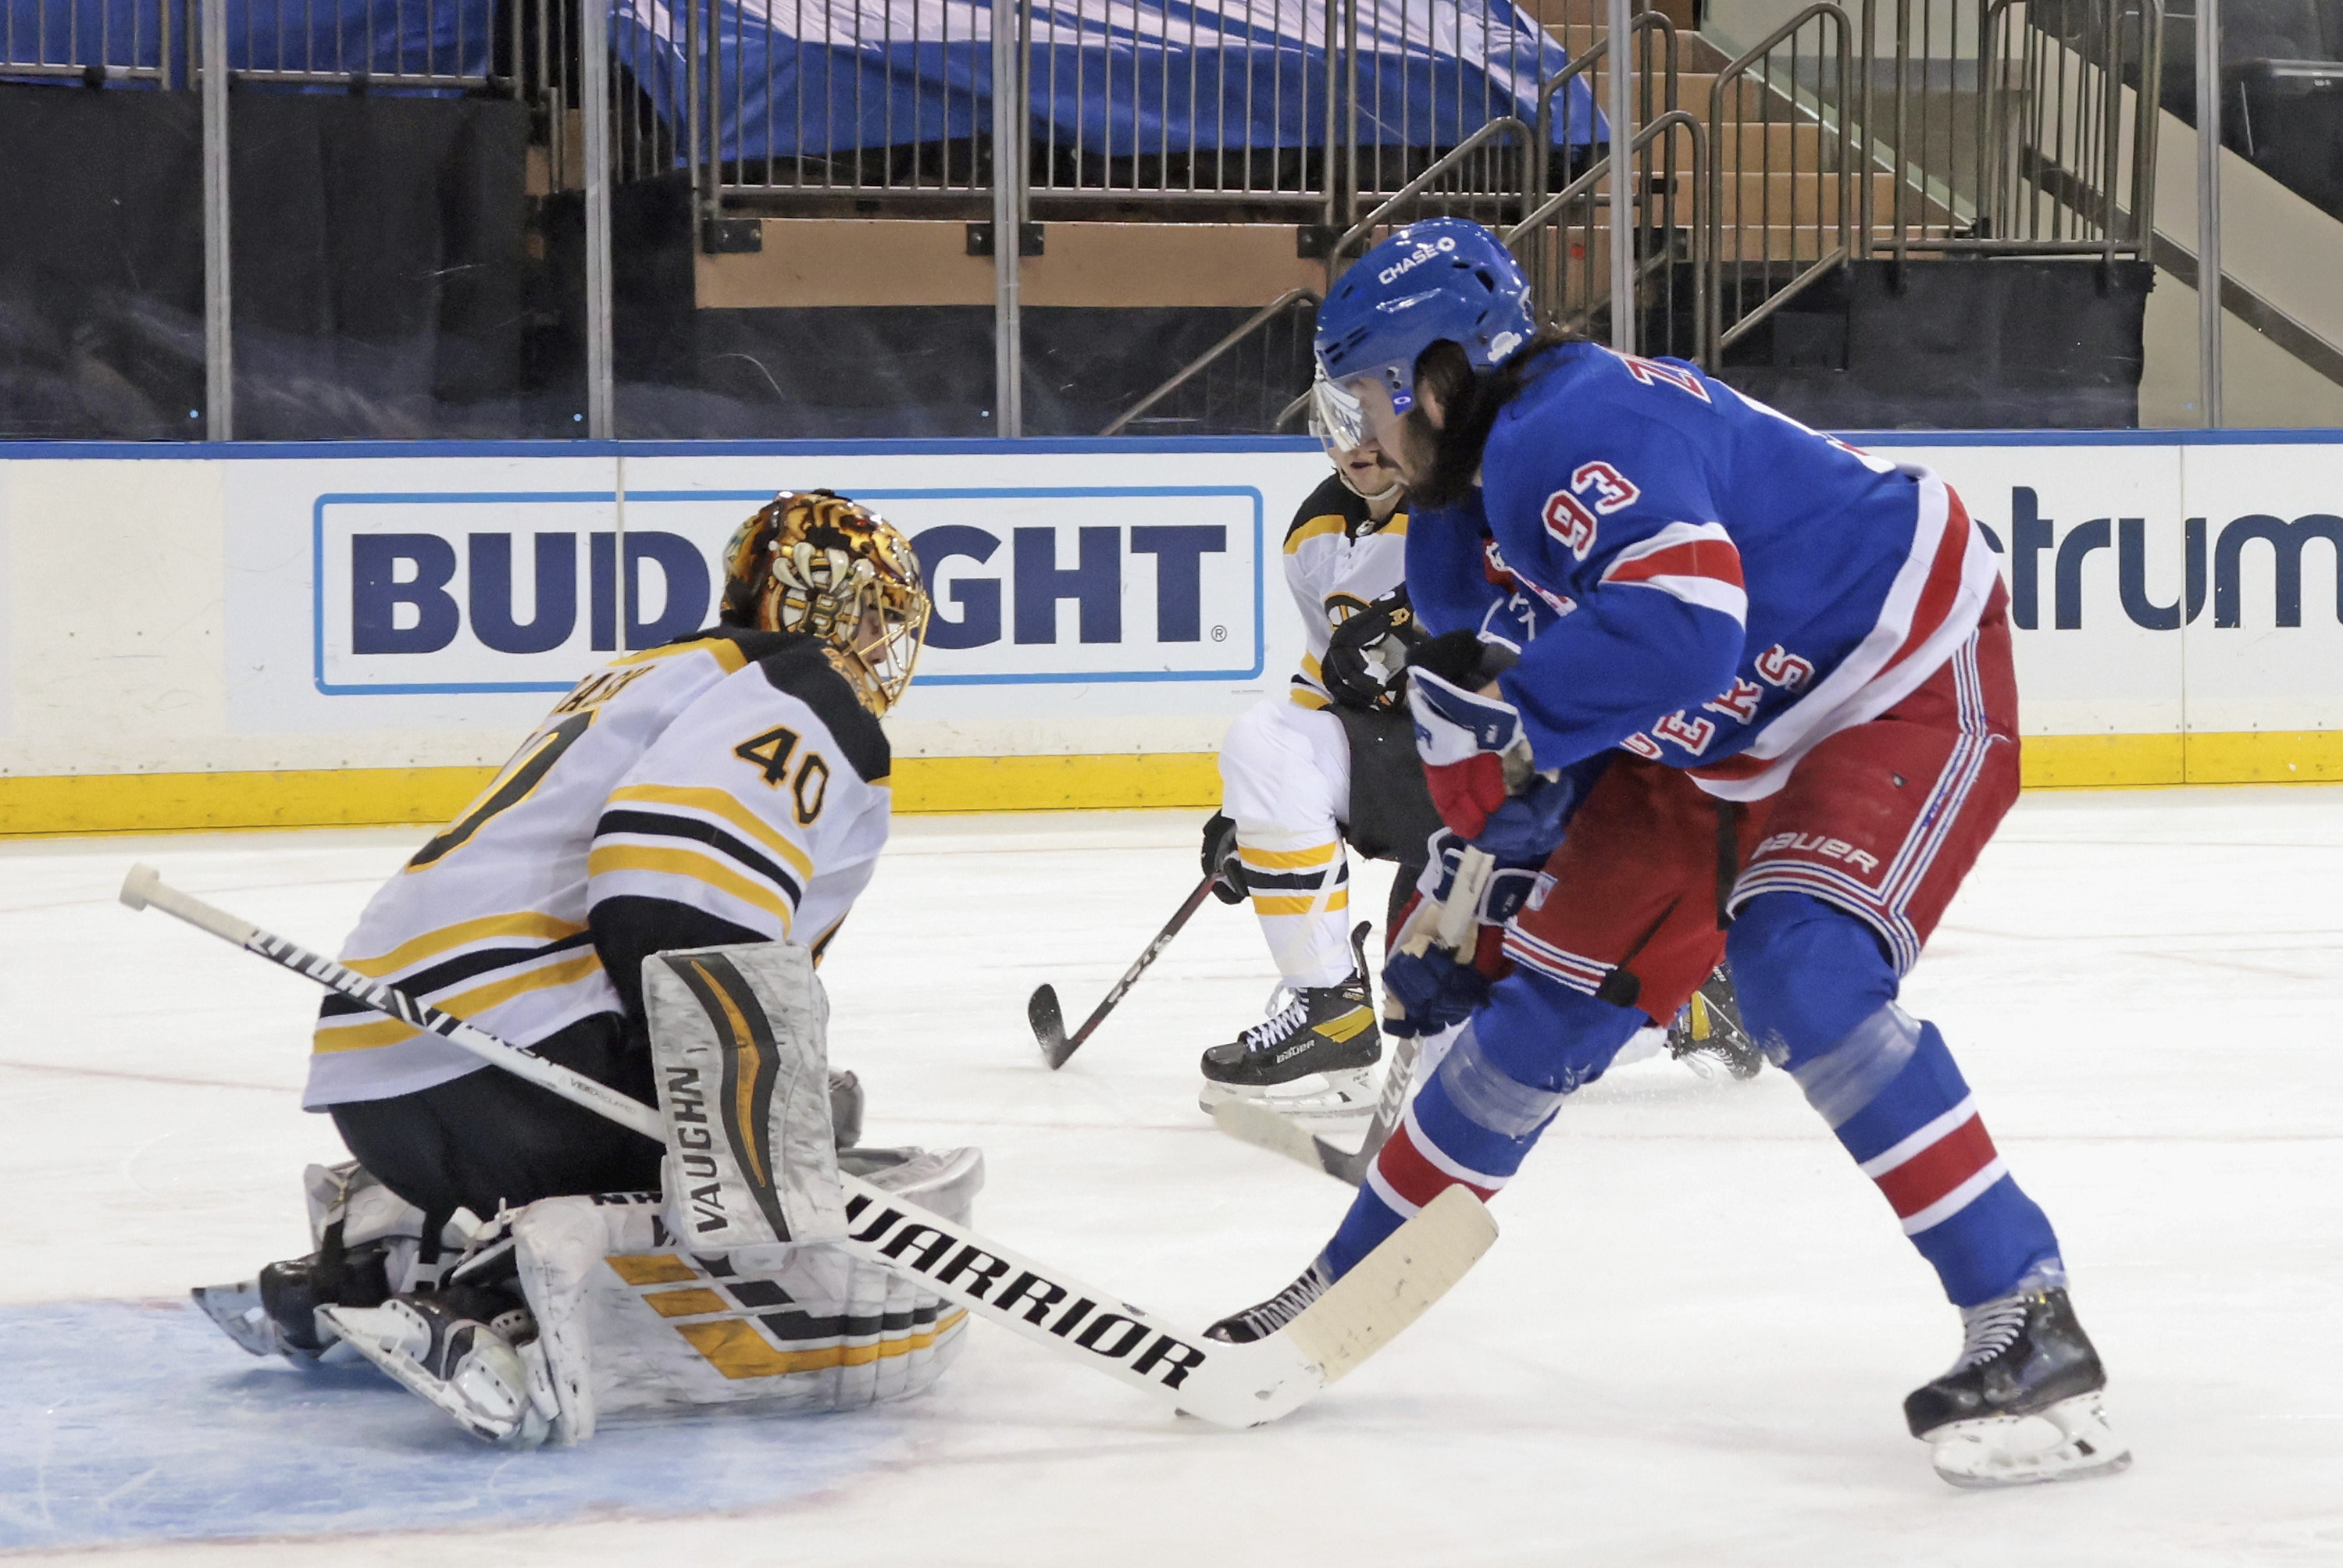 NHL How to LIVE STREAM FREE the Boston Bruins at the New York Rangers Sunday (2-28-21)